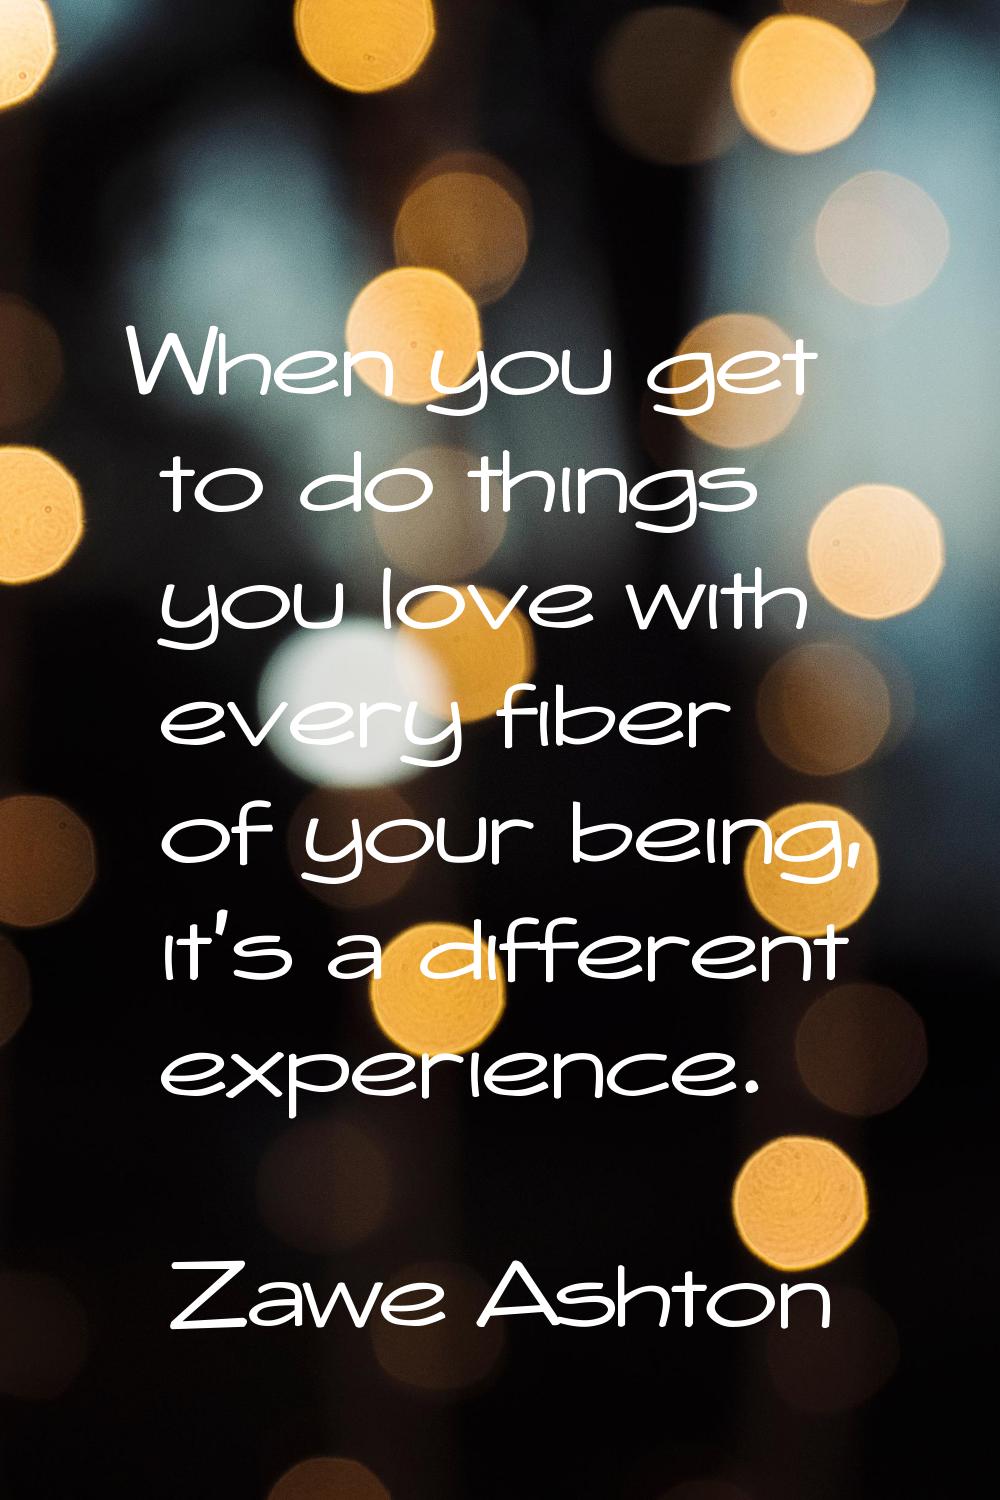 When you get to do things you love with every fiber of your being, it's a different experience.